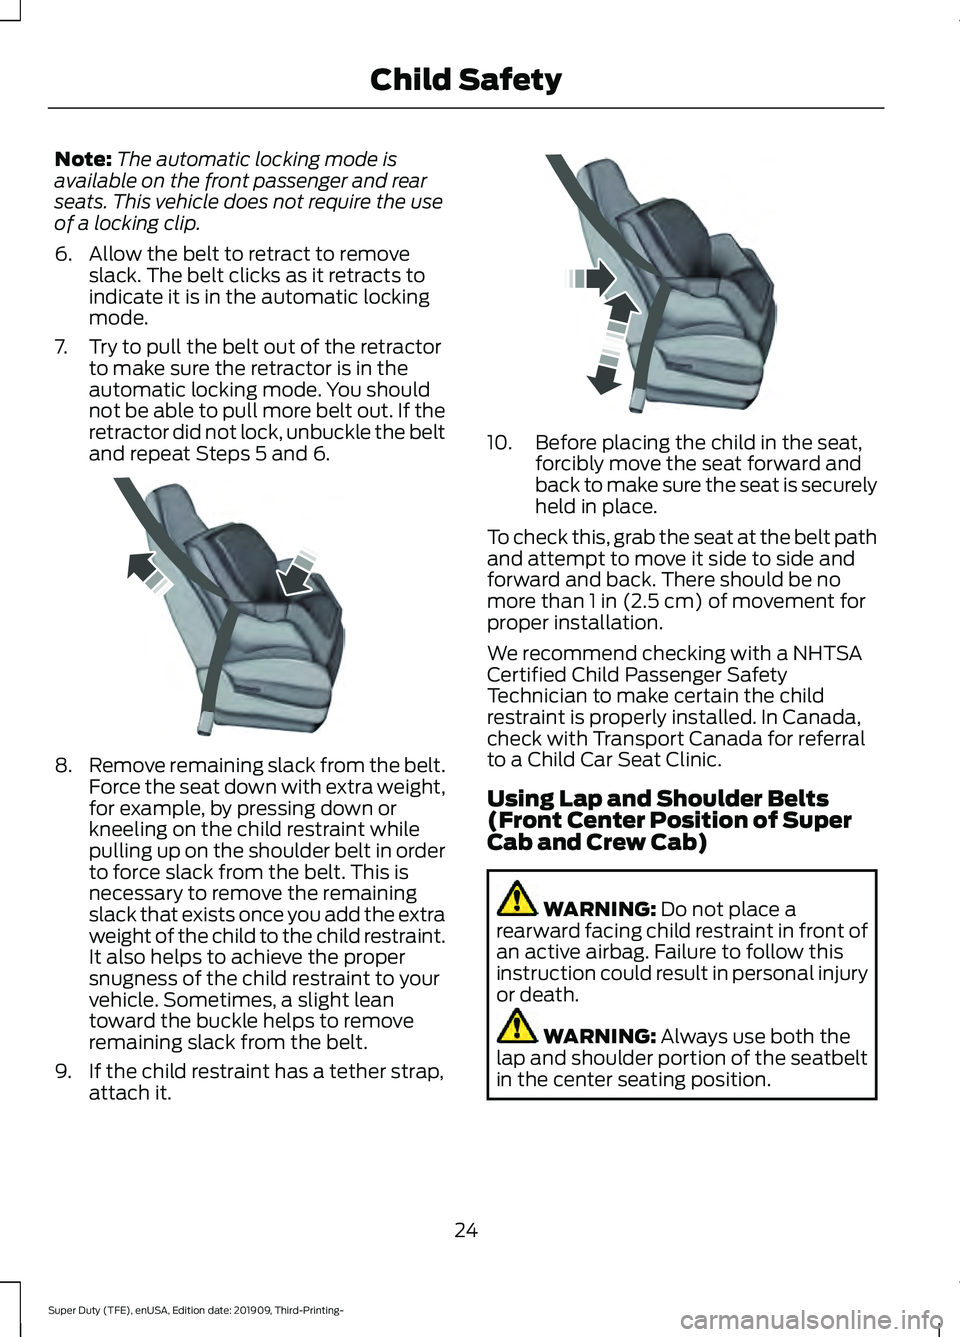 FORD F-450 2020  Owners Manual Note:
The automatic locking mode is
available on the front passenger and rear
seats. This vehicle does not require the use
of a locking clip.
6. Allow the belt to retract to remove slack. The belt cli